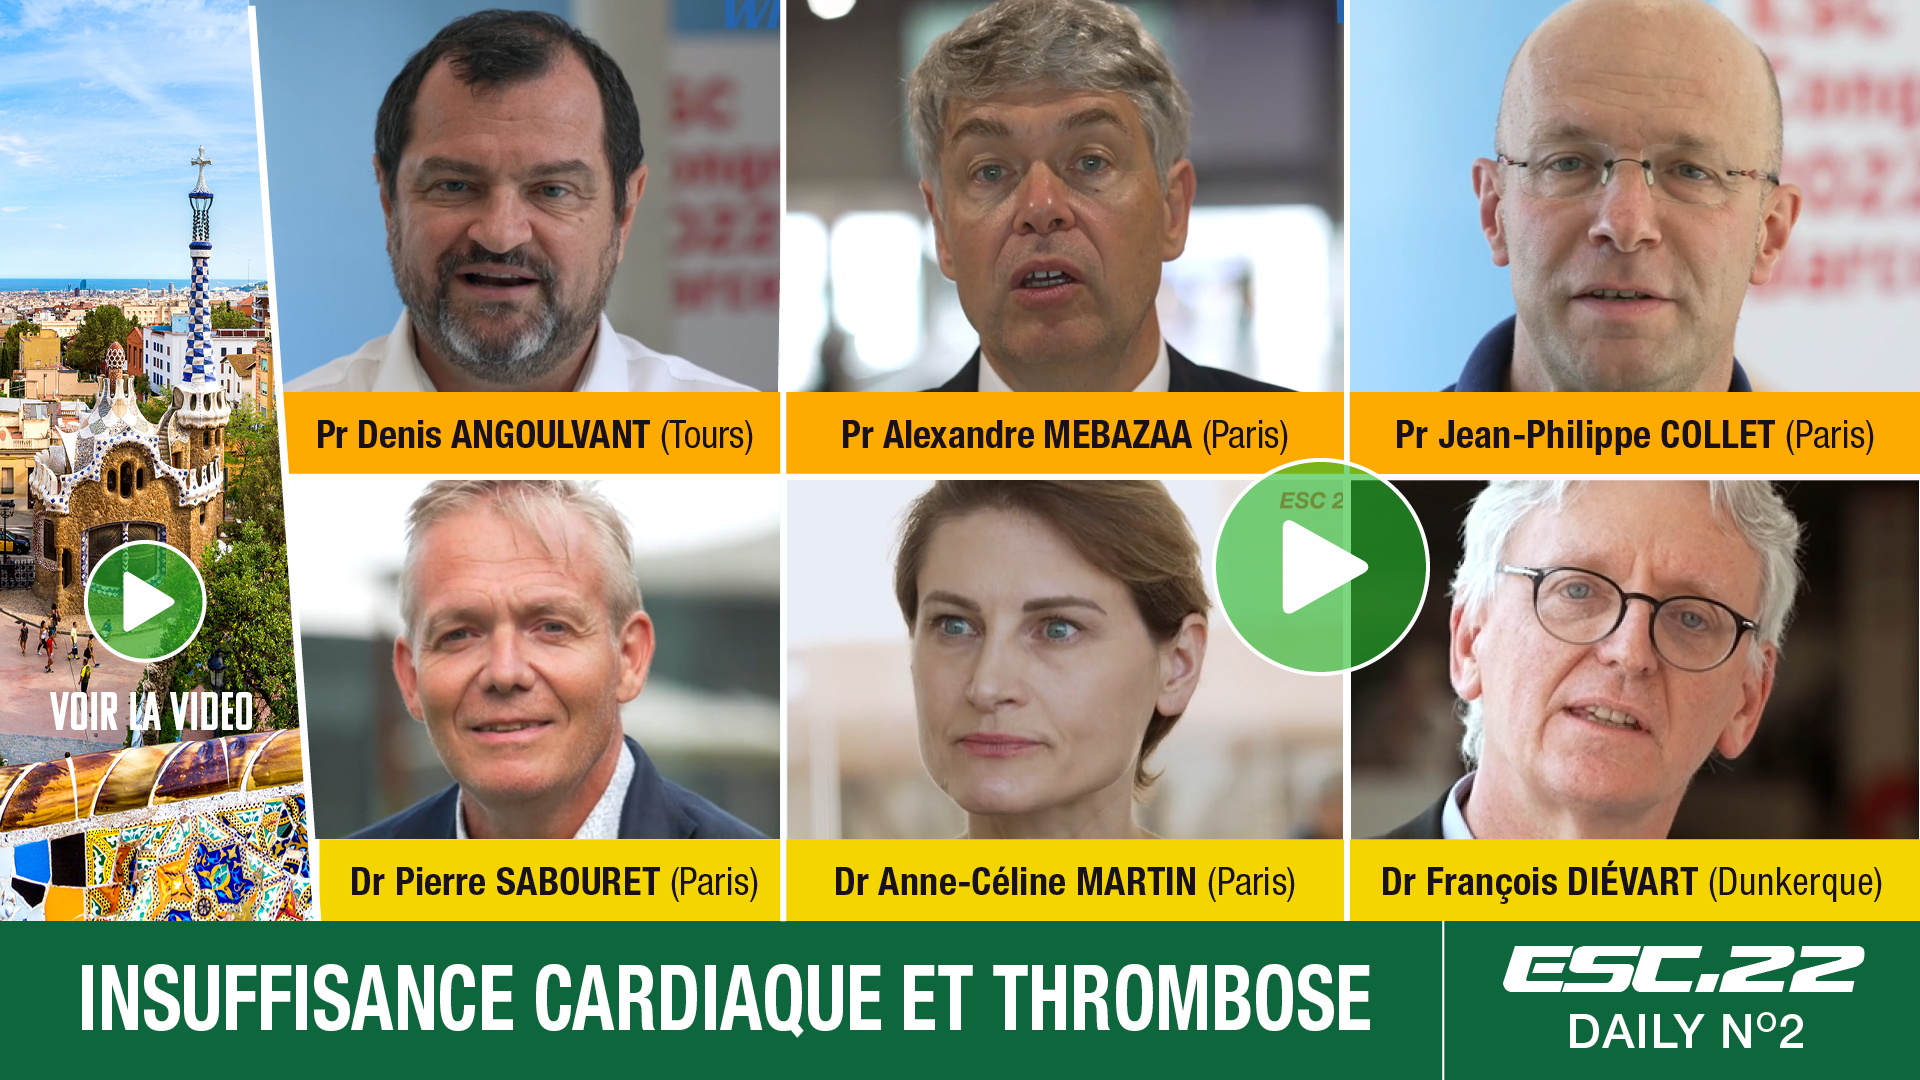 What's Up Daily #2 : Insuffisance cardiaque et thrombose - ESC 2022